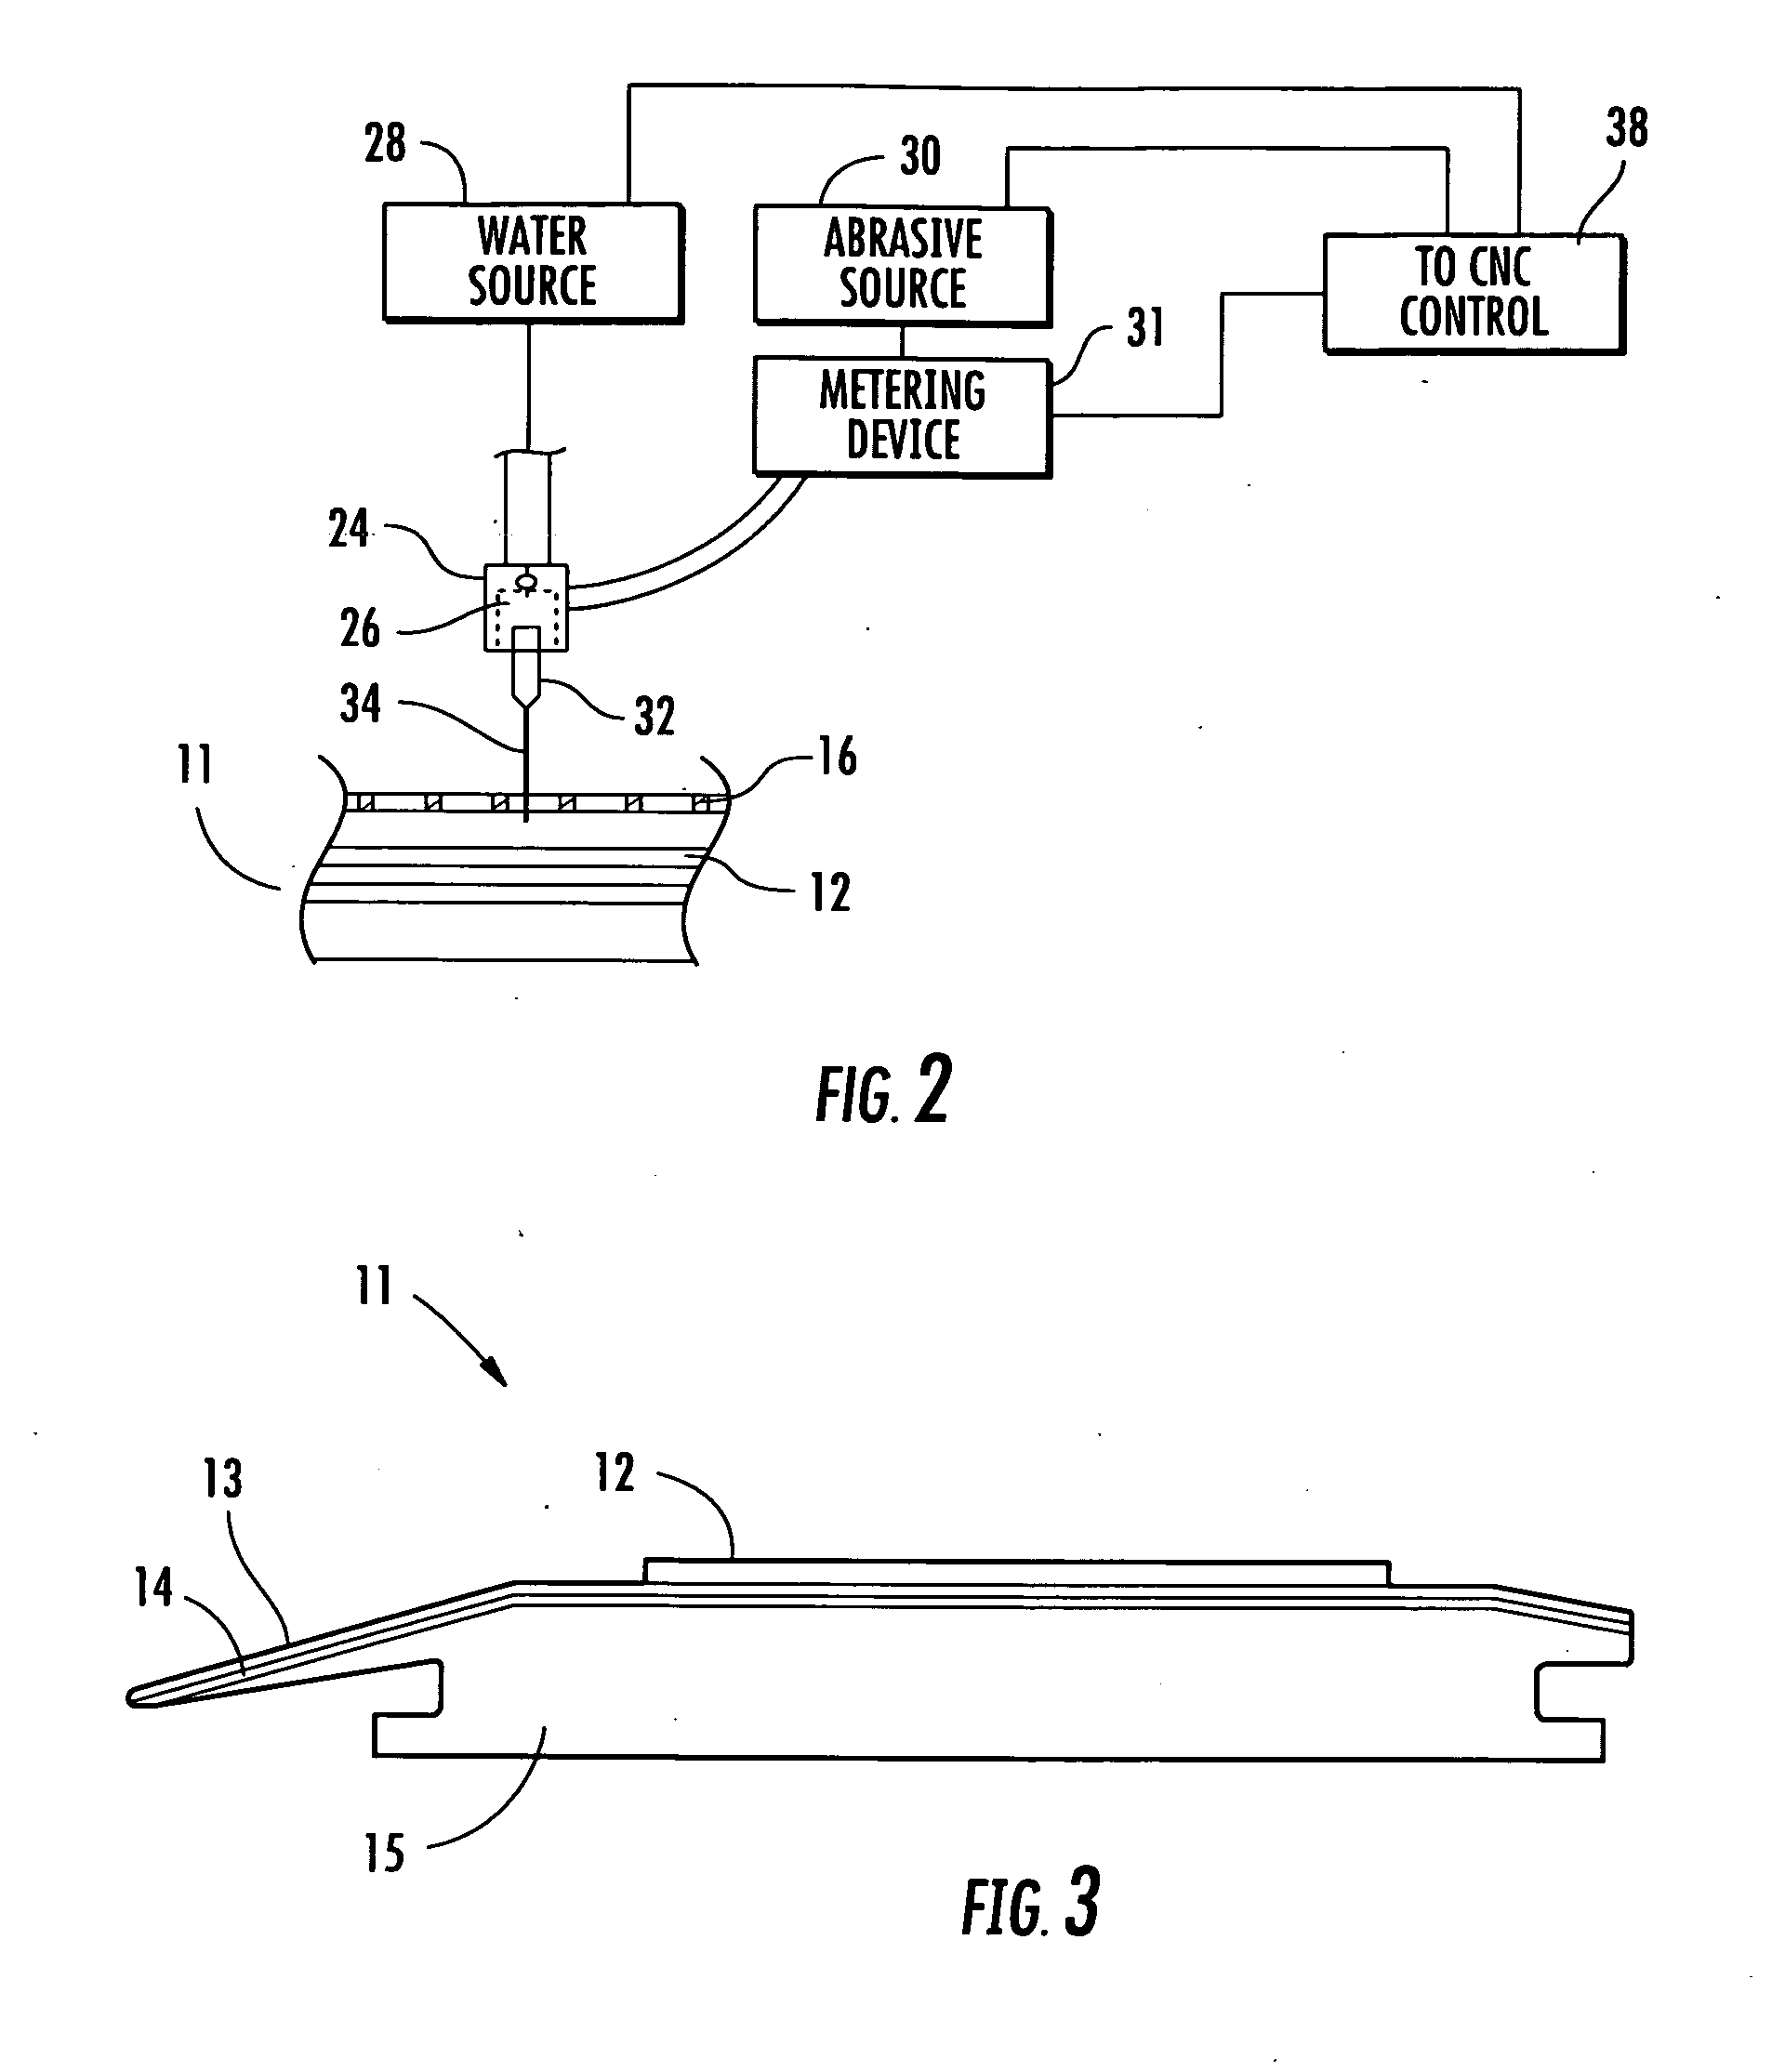 Method and apparatus for selectively removing portions of an abradable coating using a water jet